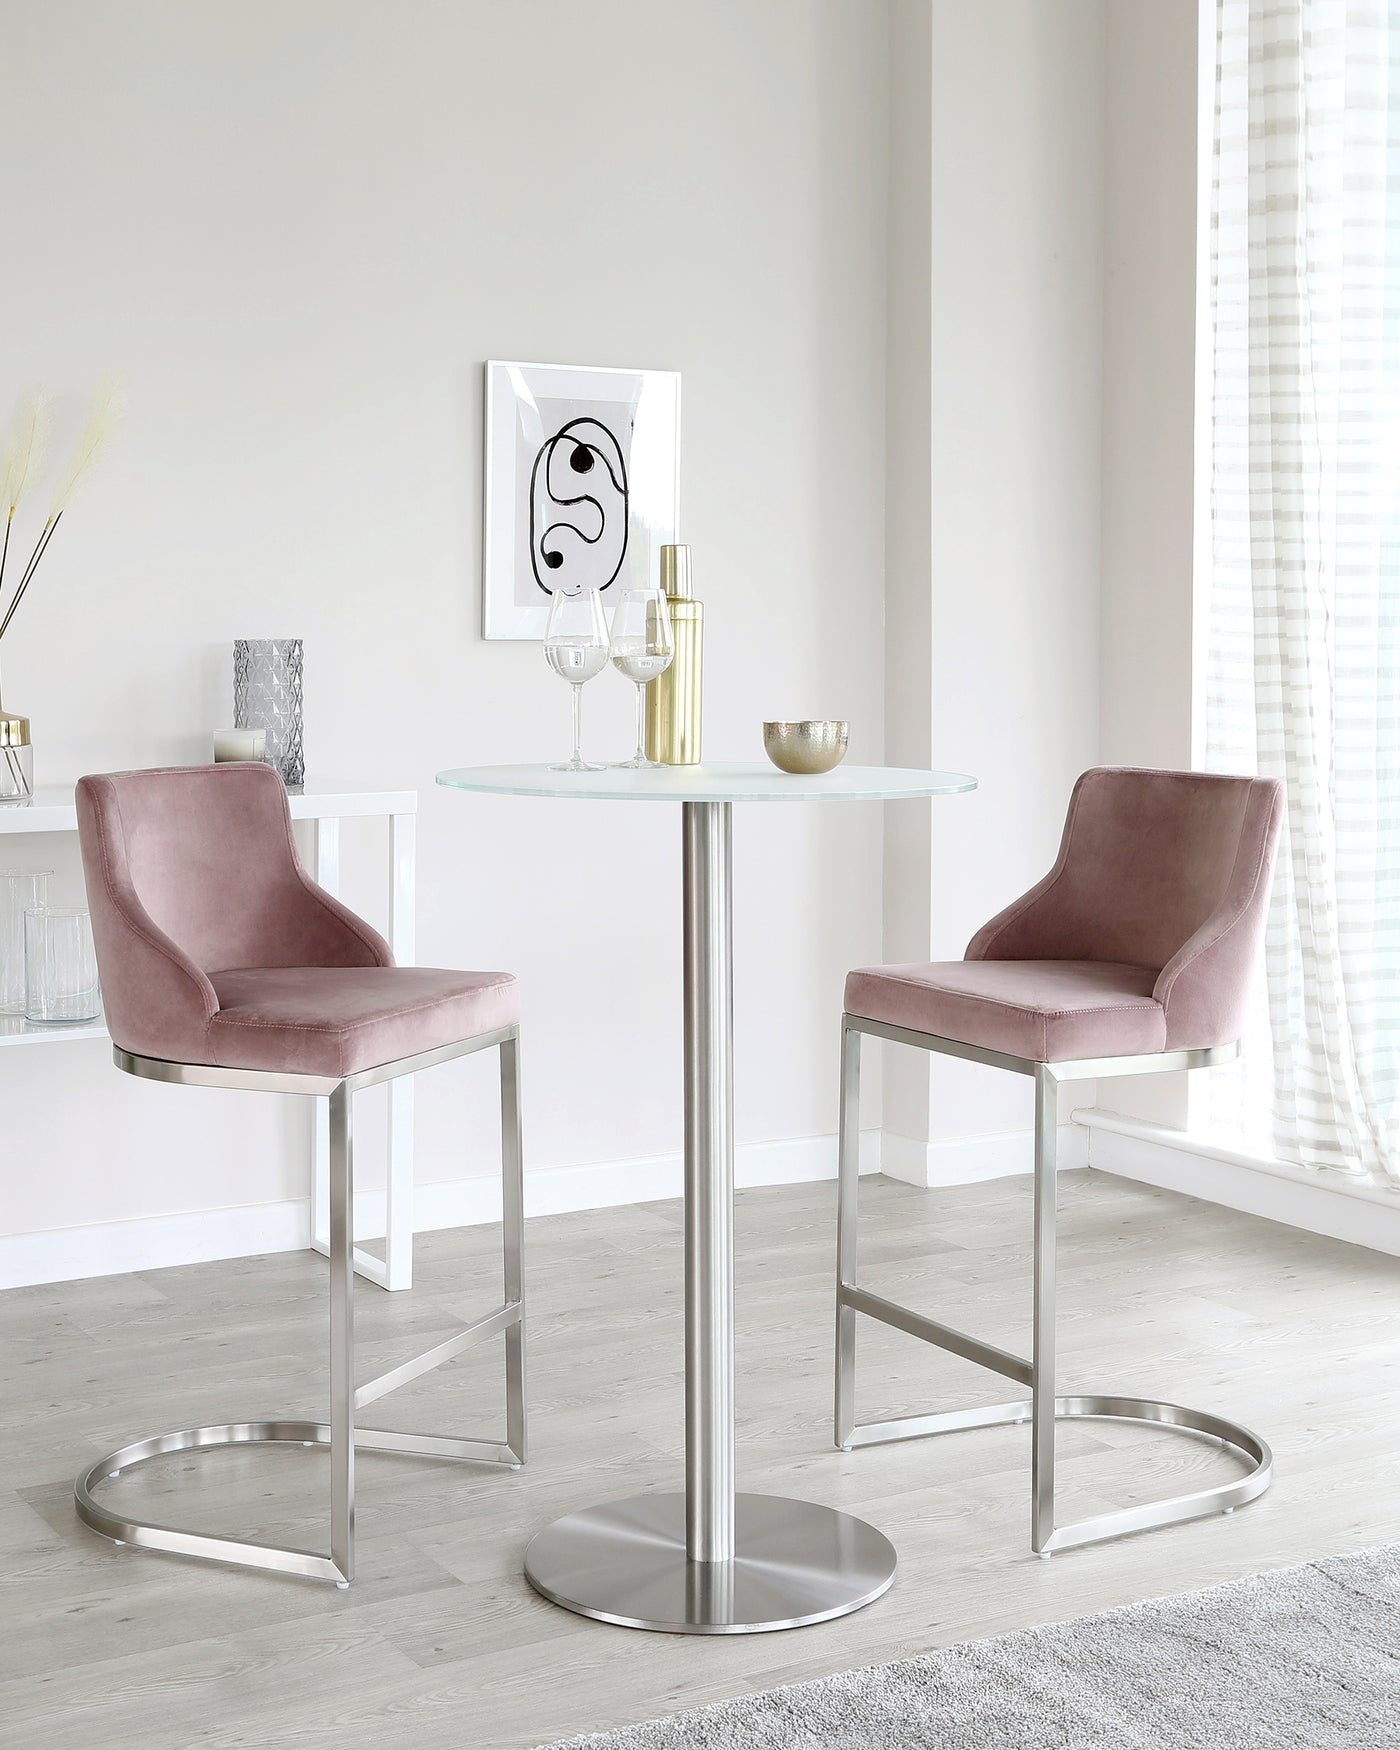 A modern dining set with two mauve velvet upholstered bar chairs featuring a sleek metal frame with a footrest, and a round glass-top table standing on a central polished metal pedestal.